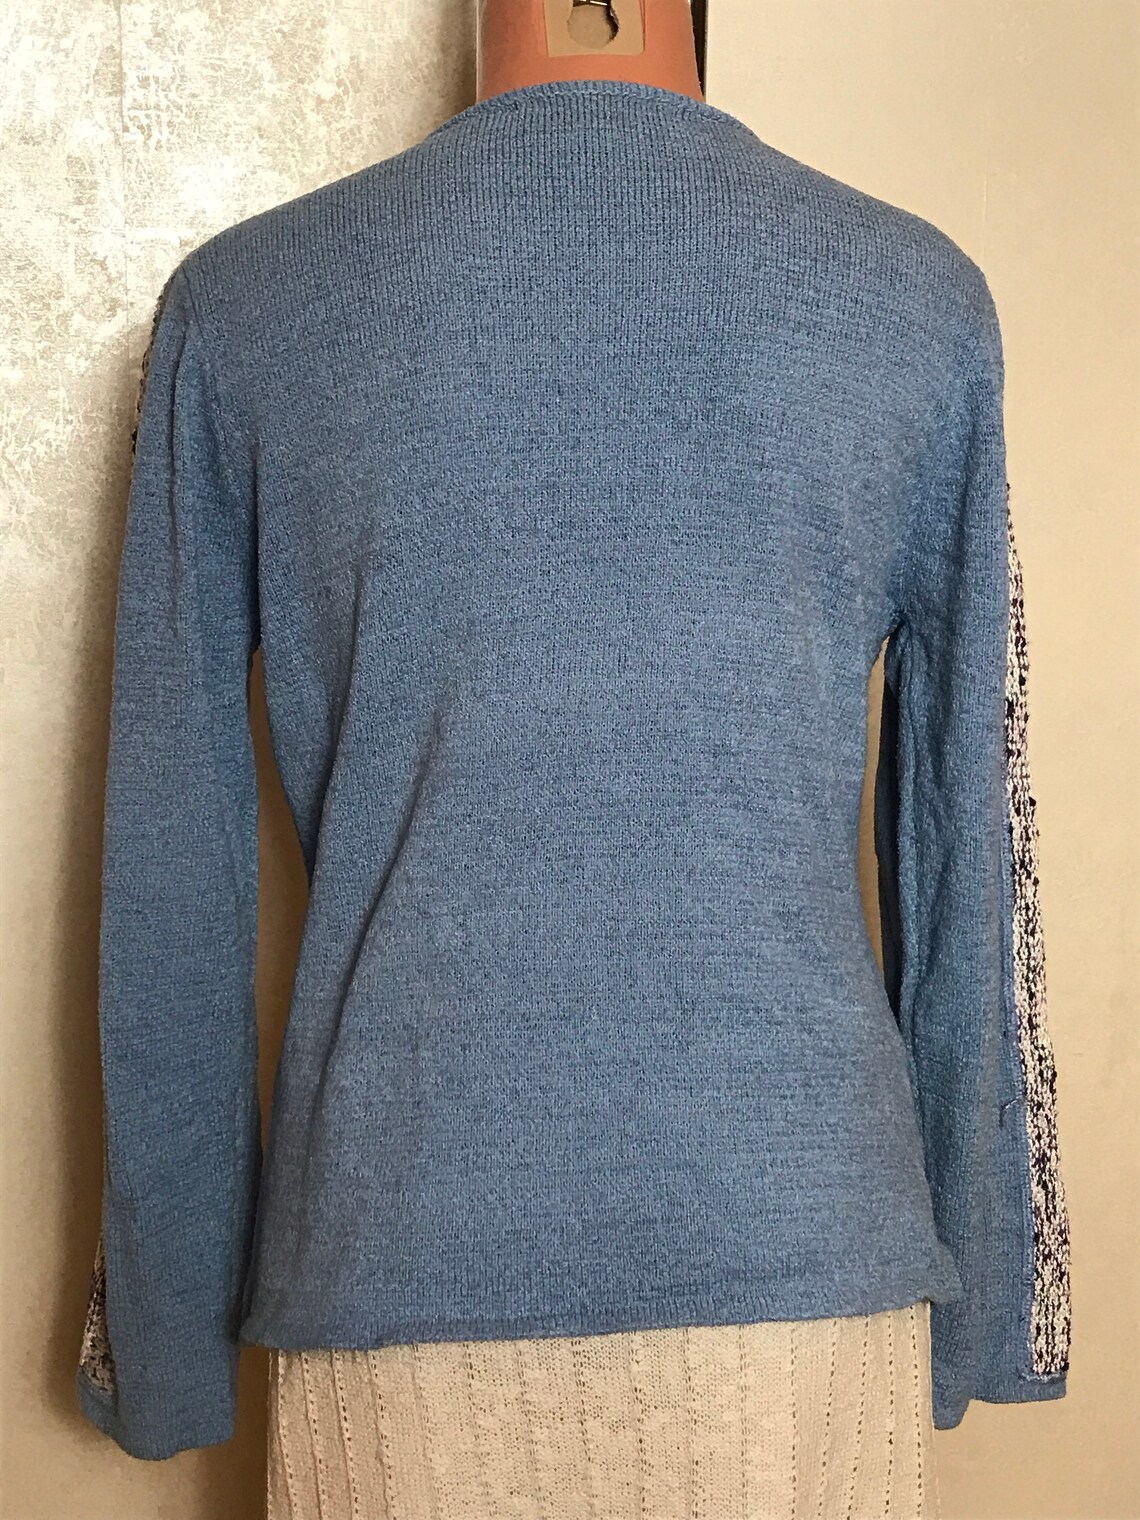 Blue Knitted Womans Sweater With Button up Front - Etsy UK